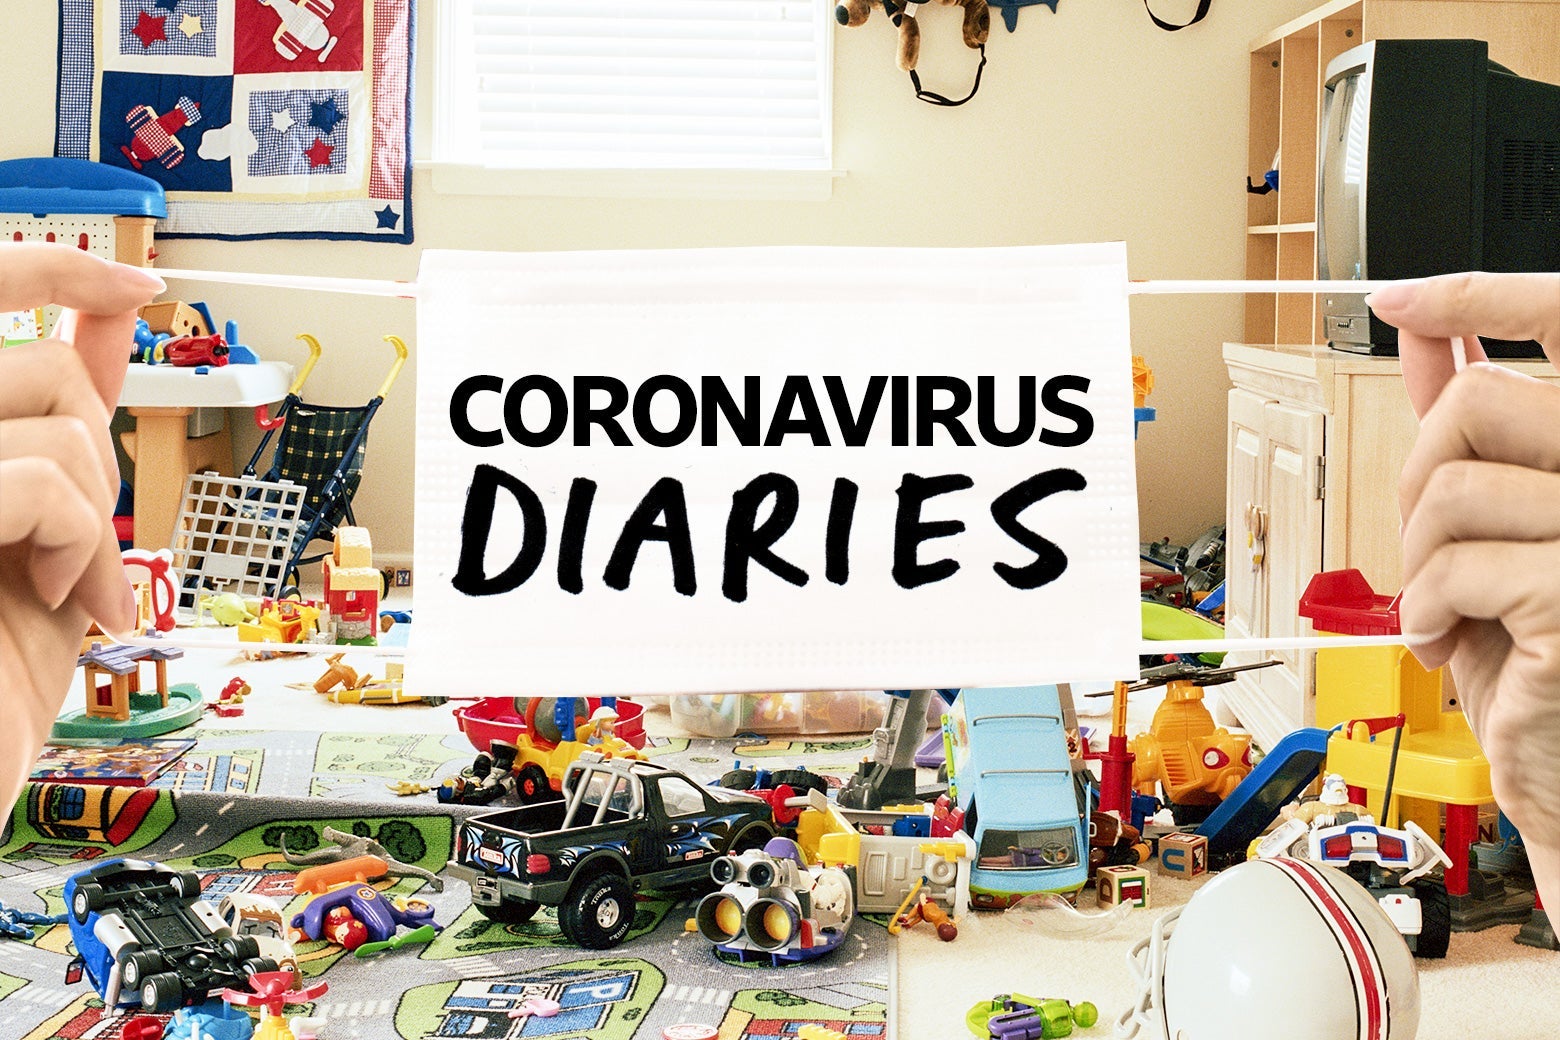 Hands holding up a mask that reads "Coronavirus Diaries," overlaid on a photo of a children's playroom